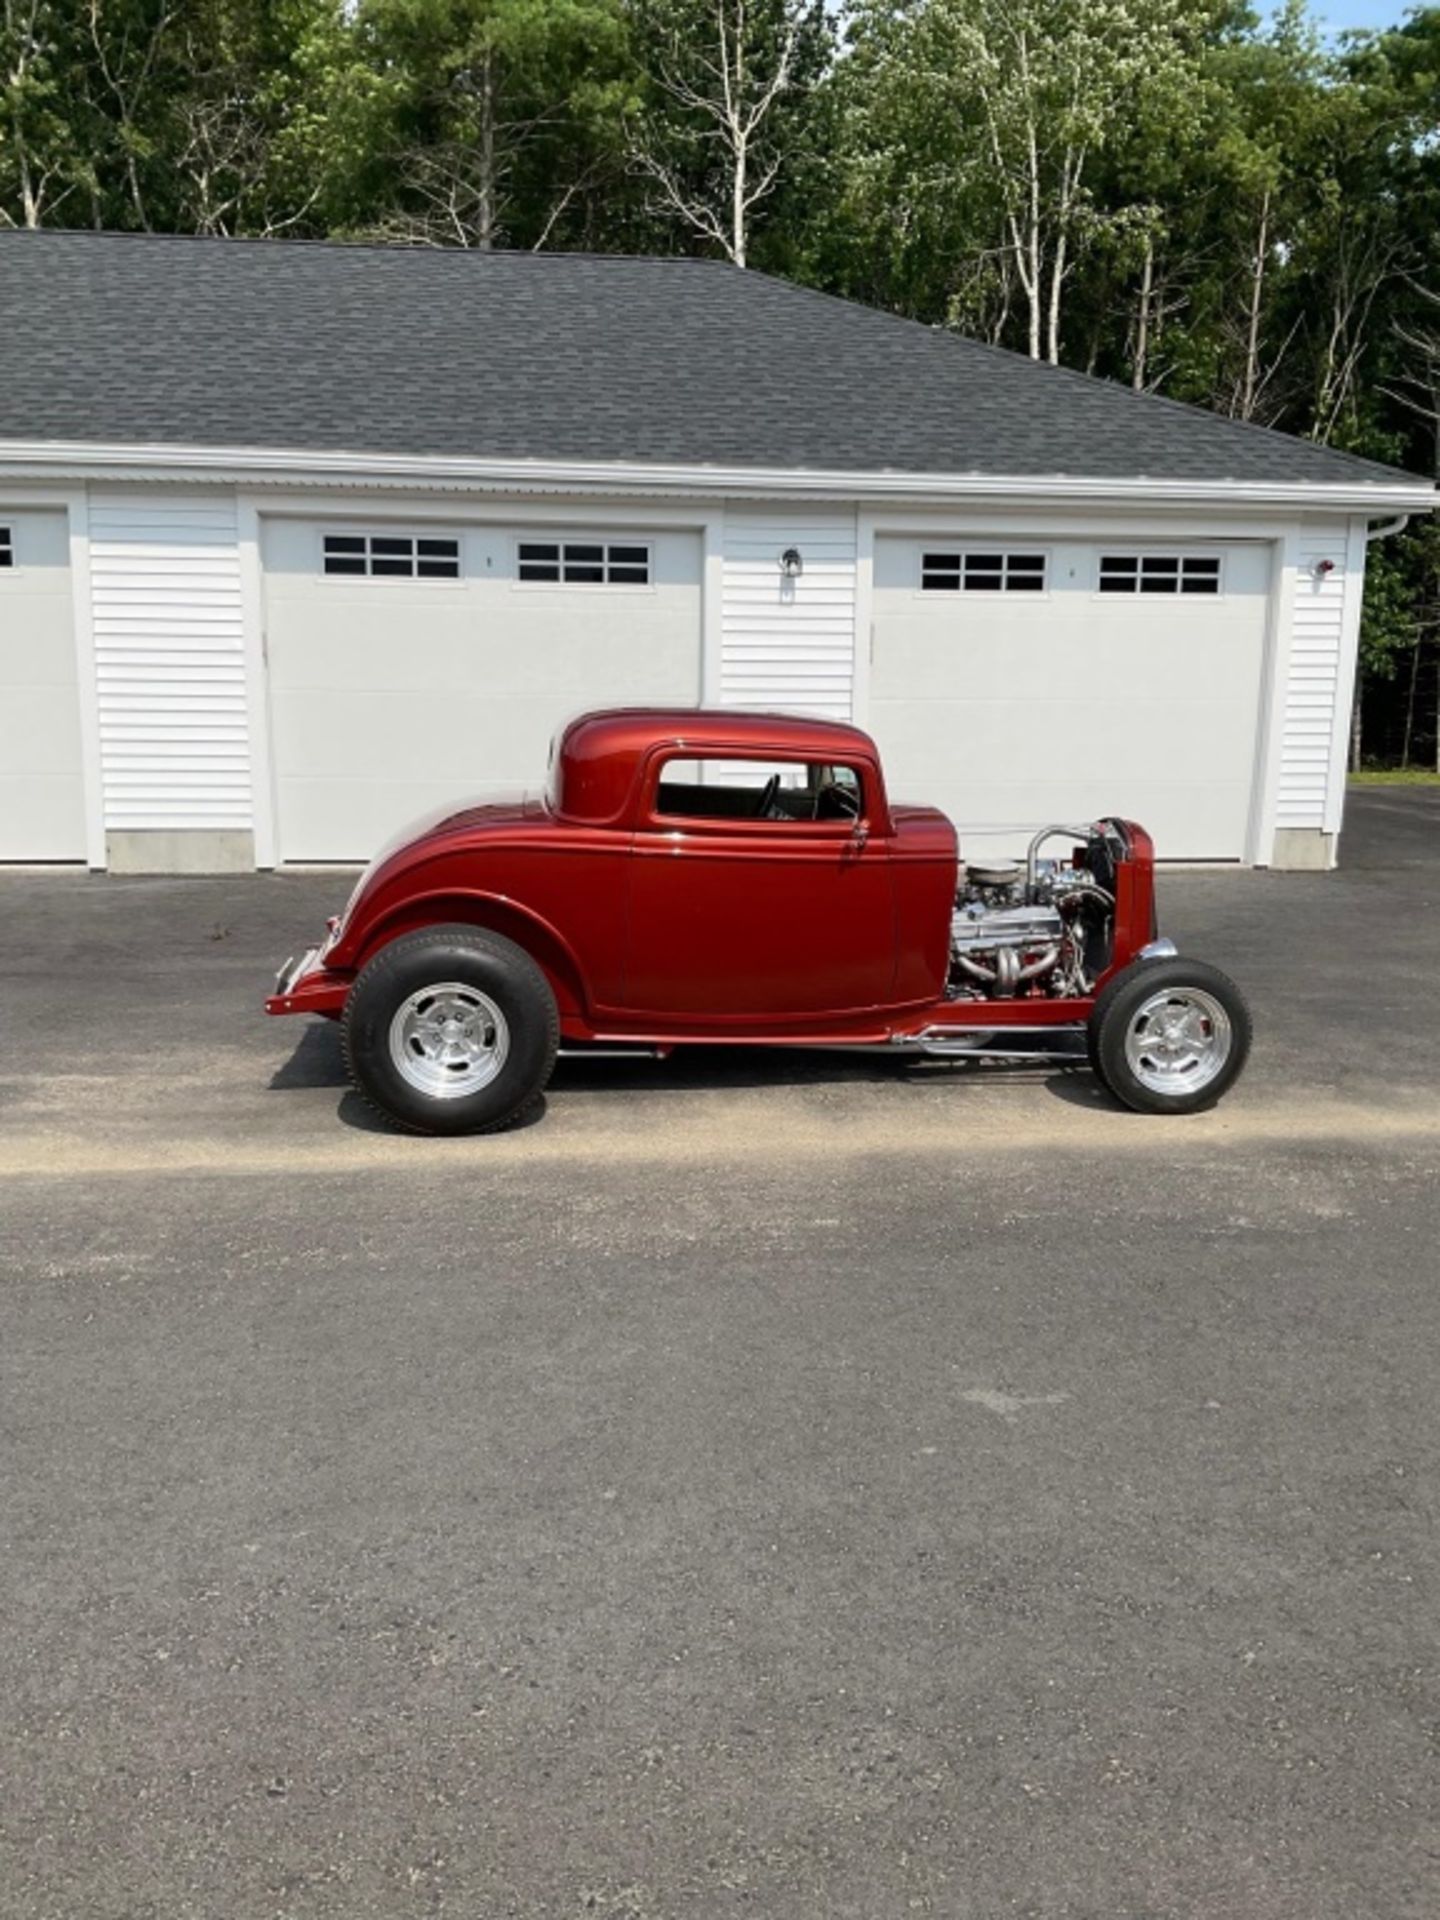 1932 Ford Deuce Coupe Replica - Image 3 of 14